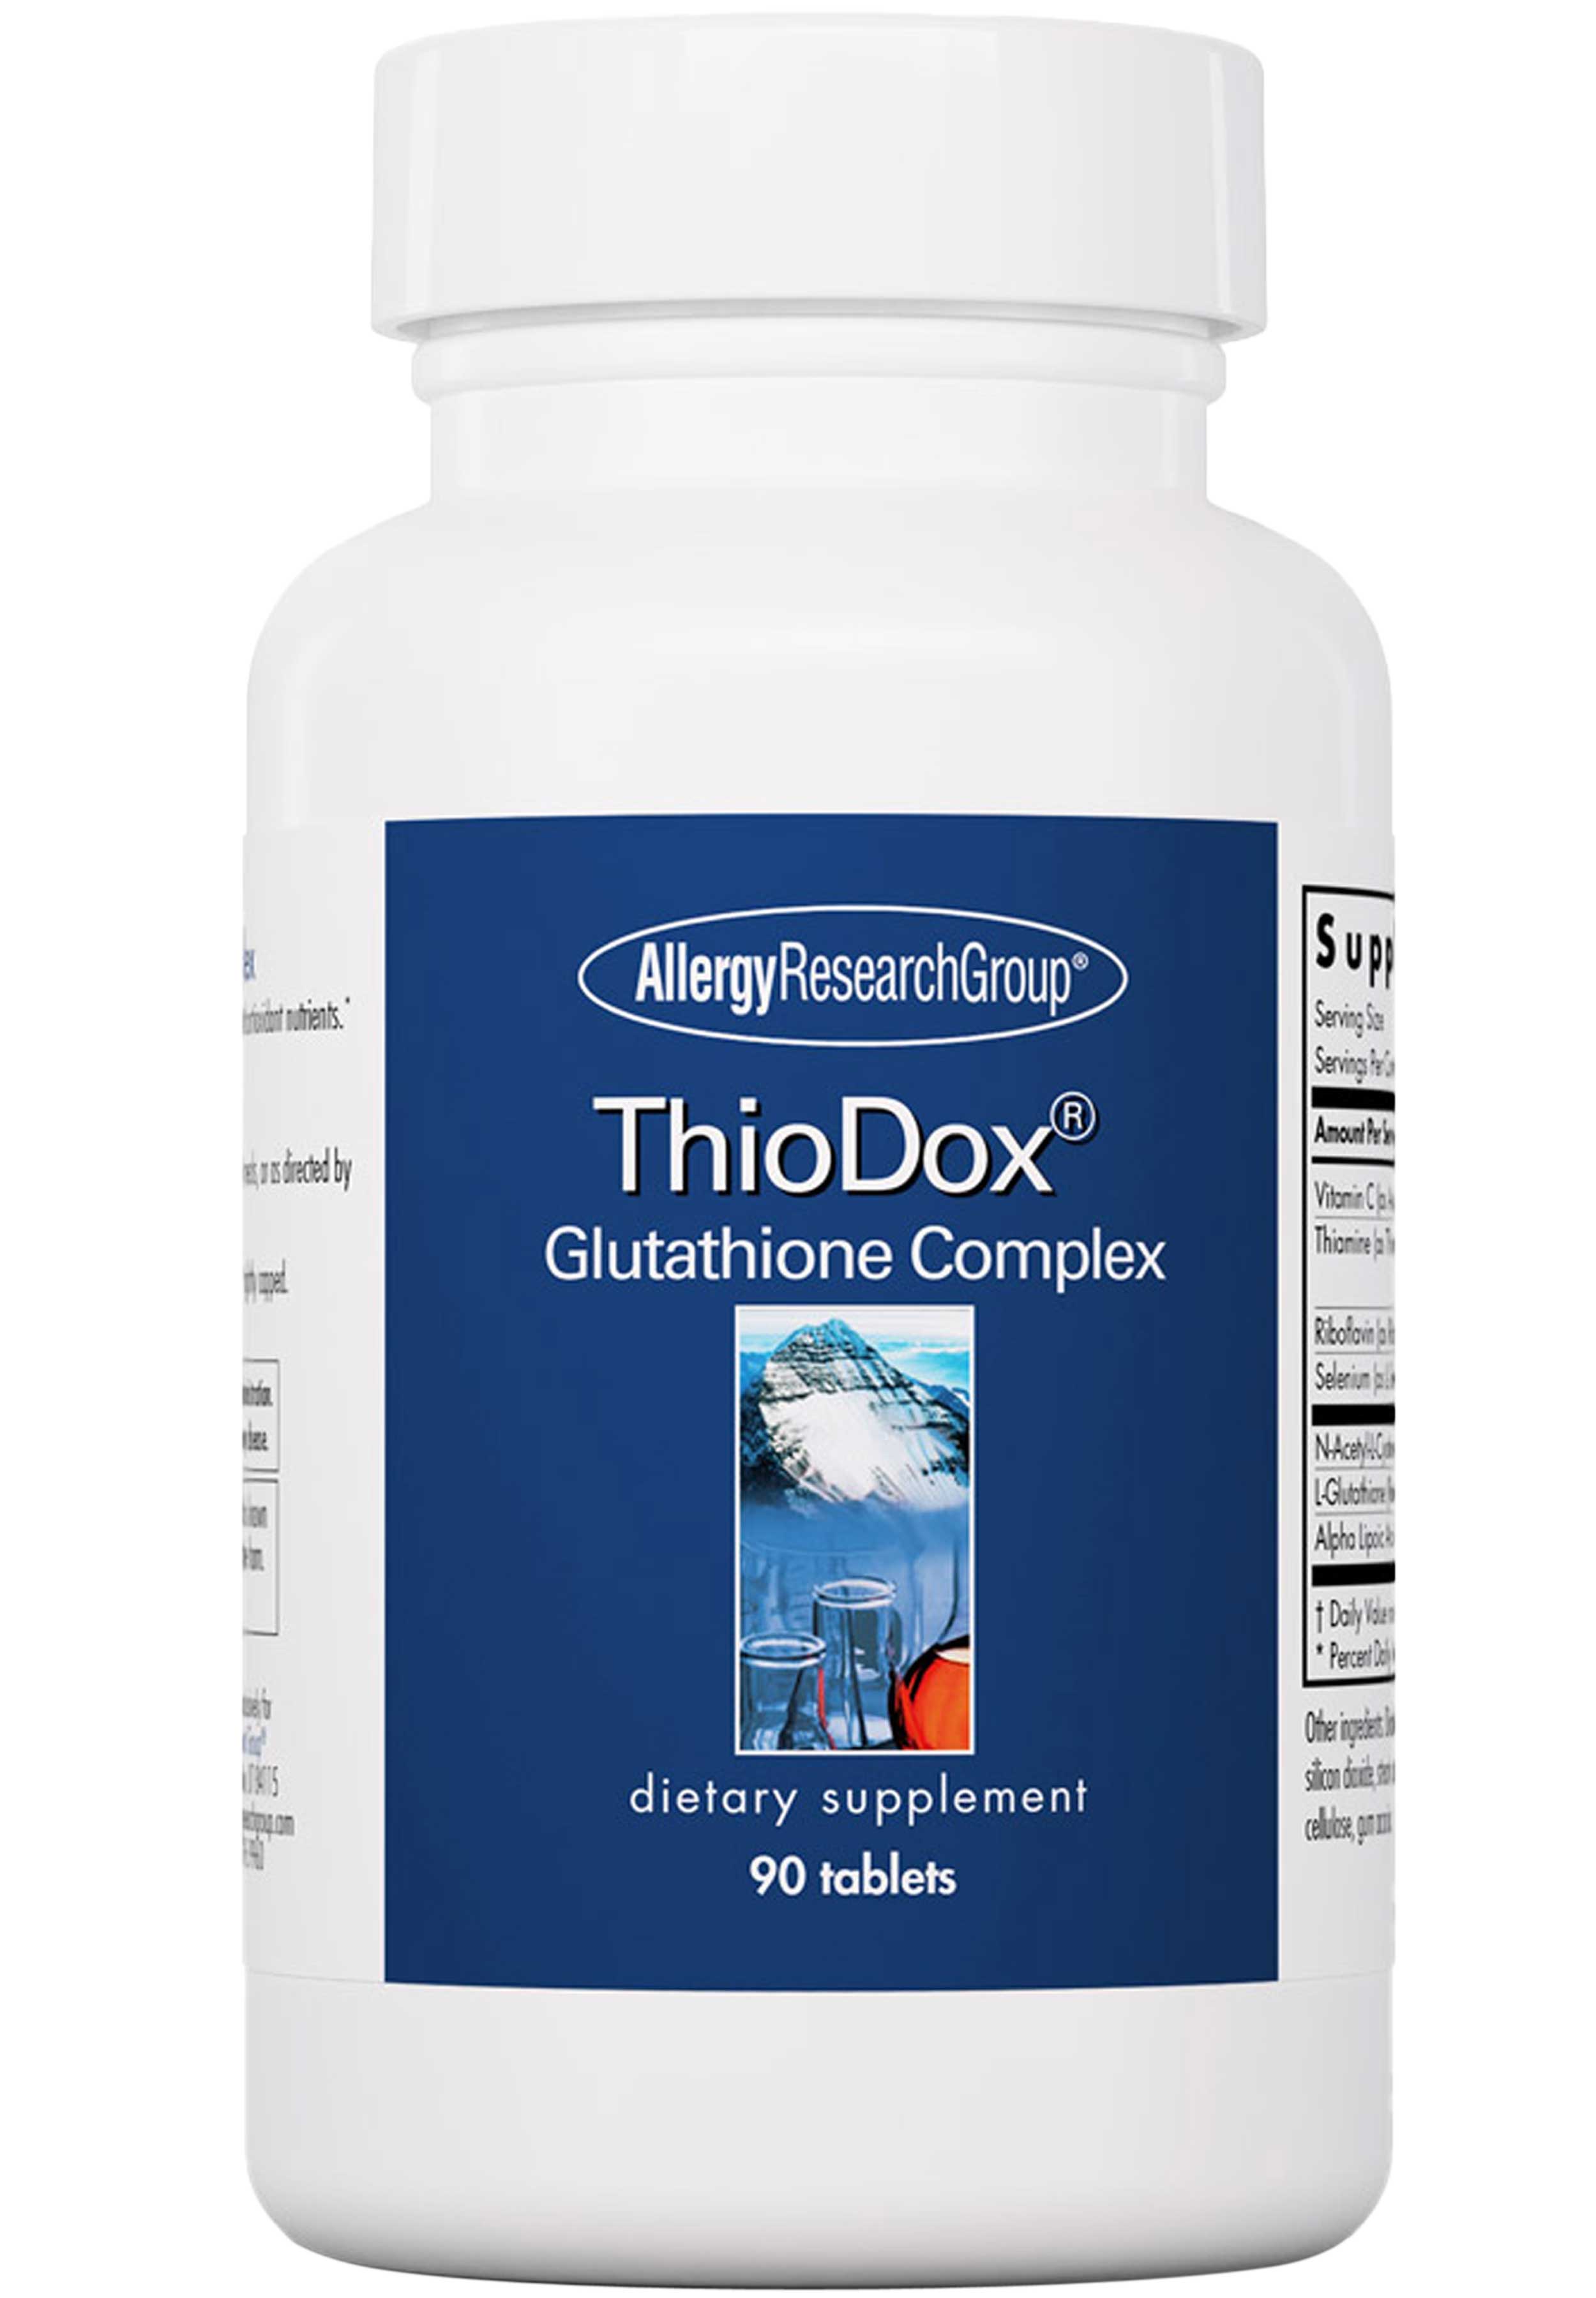 Allergy Research Group ThioDox